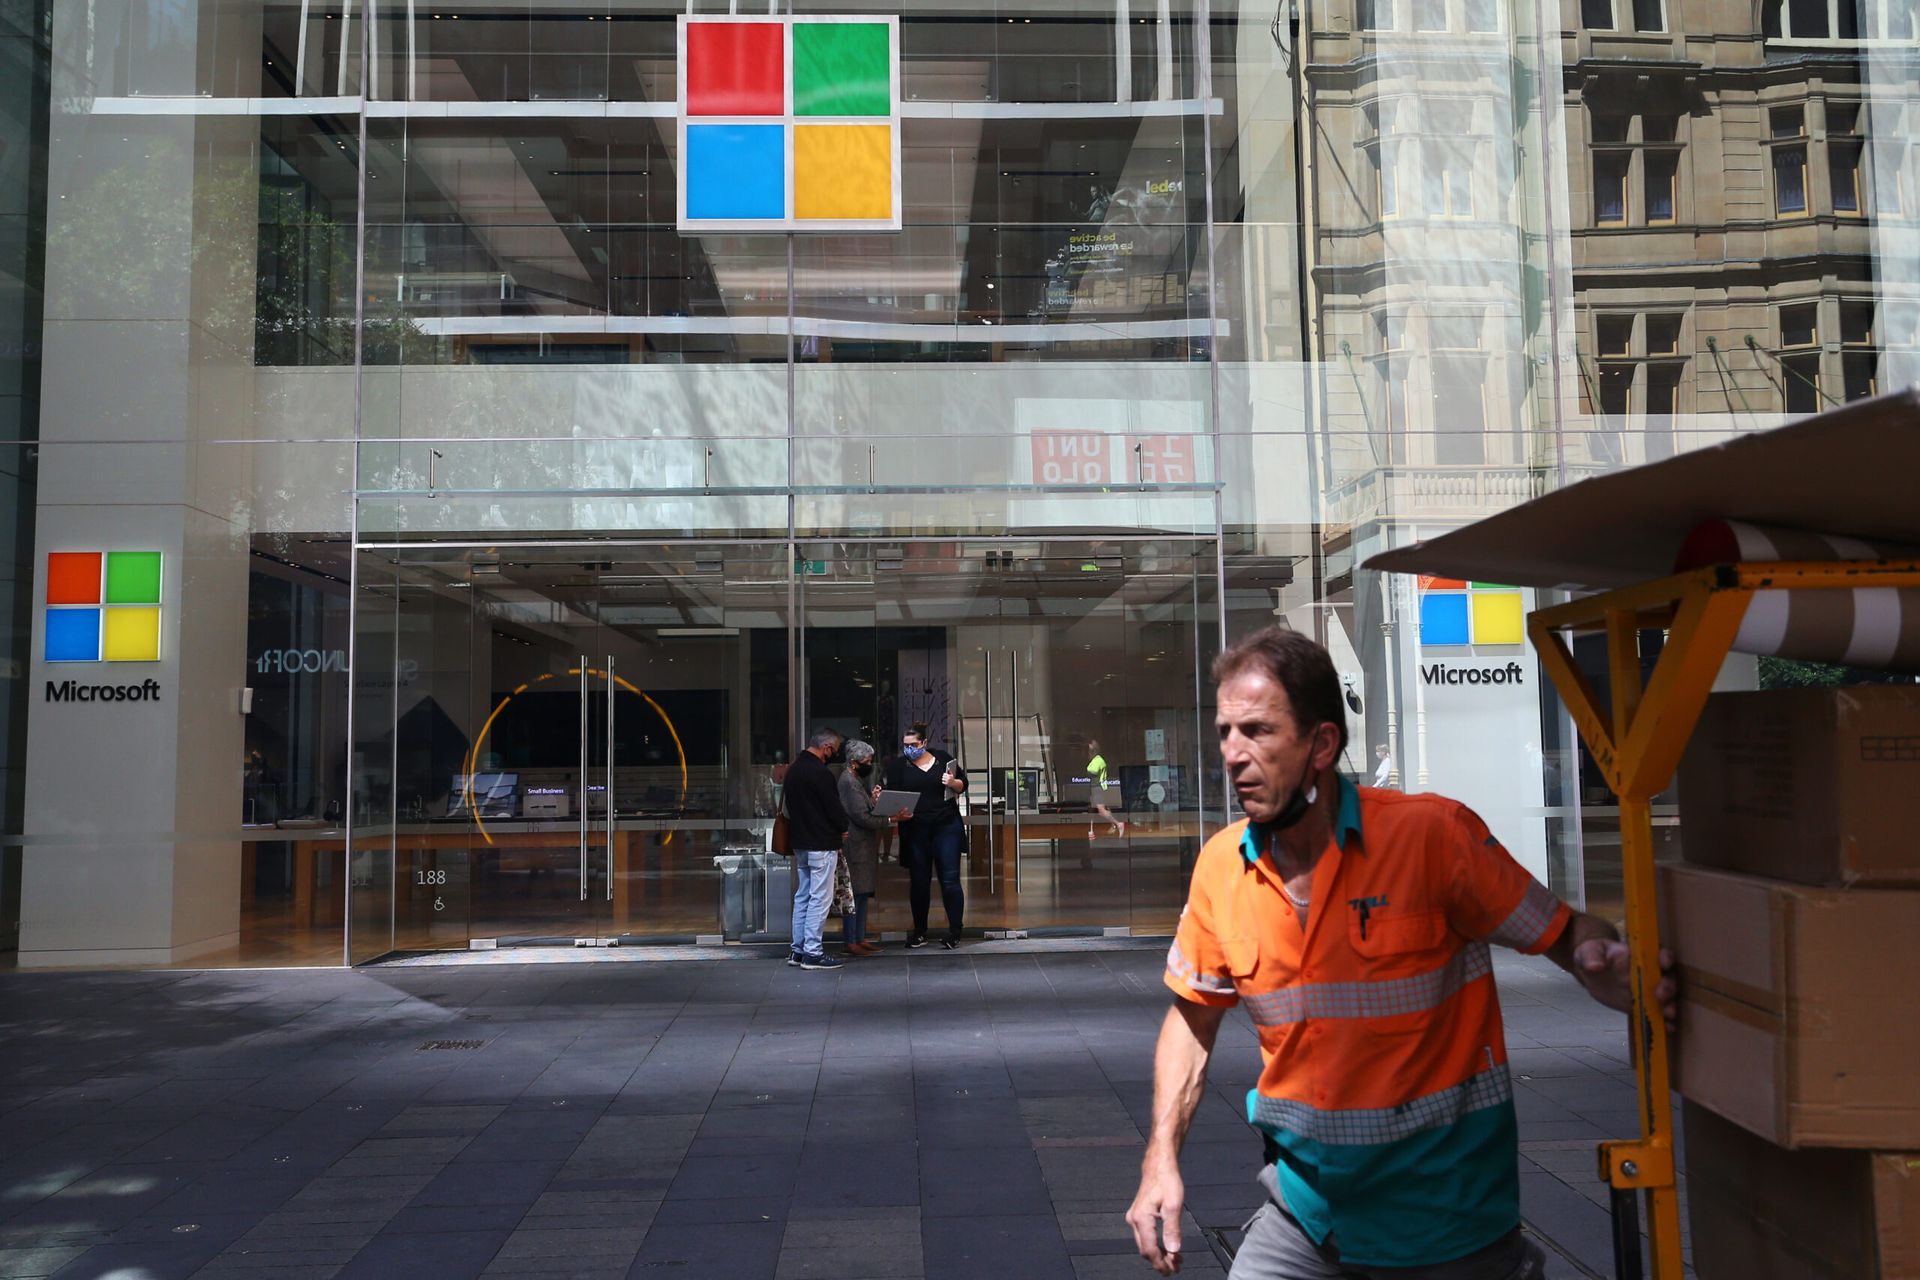 SYDNEY, AUSTRALIA &#8211; OCTOBER 19: People move past a Microsoft store in the Pitt Street shopping district on October 19, 2021 in Sydney, Australia. COVID-19 restrictions have eased further for fully vaccinated people across NSW this week after the state passed its 80 per cent double vaccination target. (Photo by Lisa Maree Williams/Getty Images...